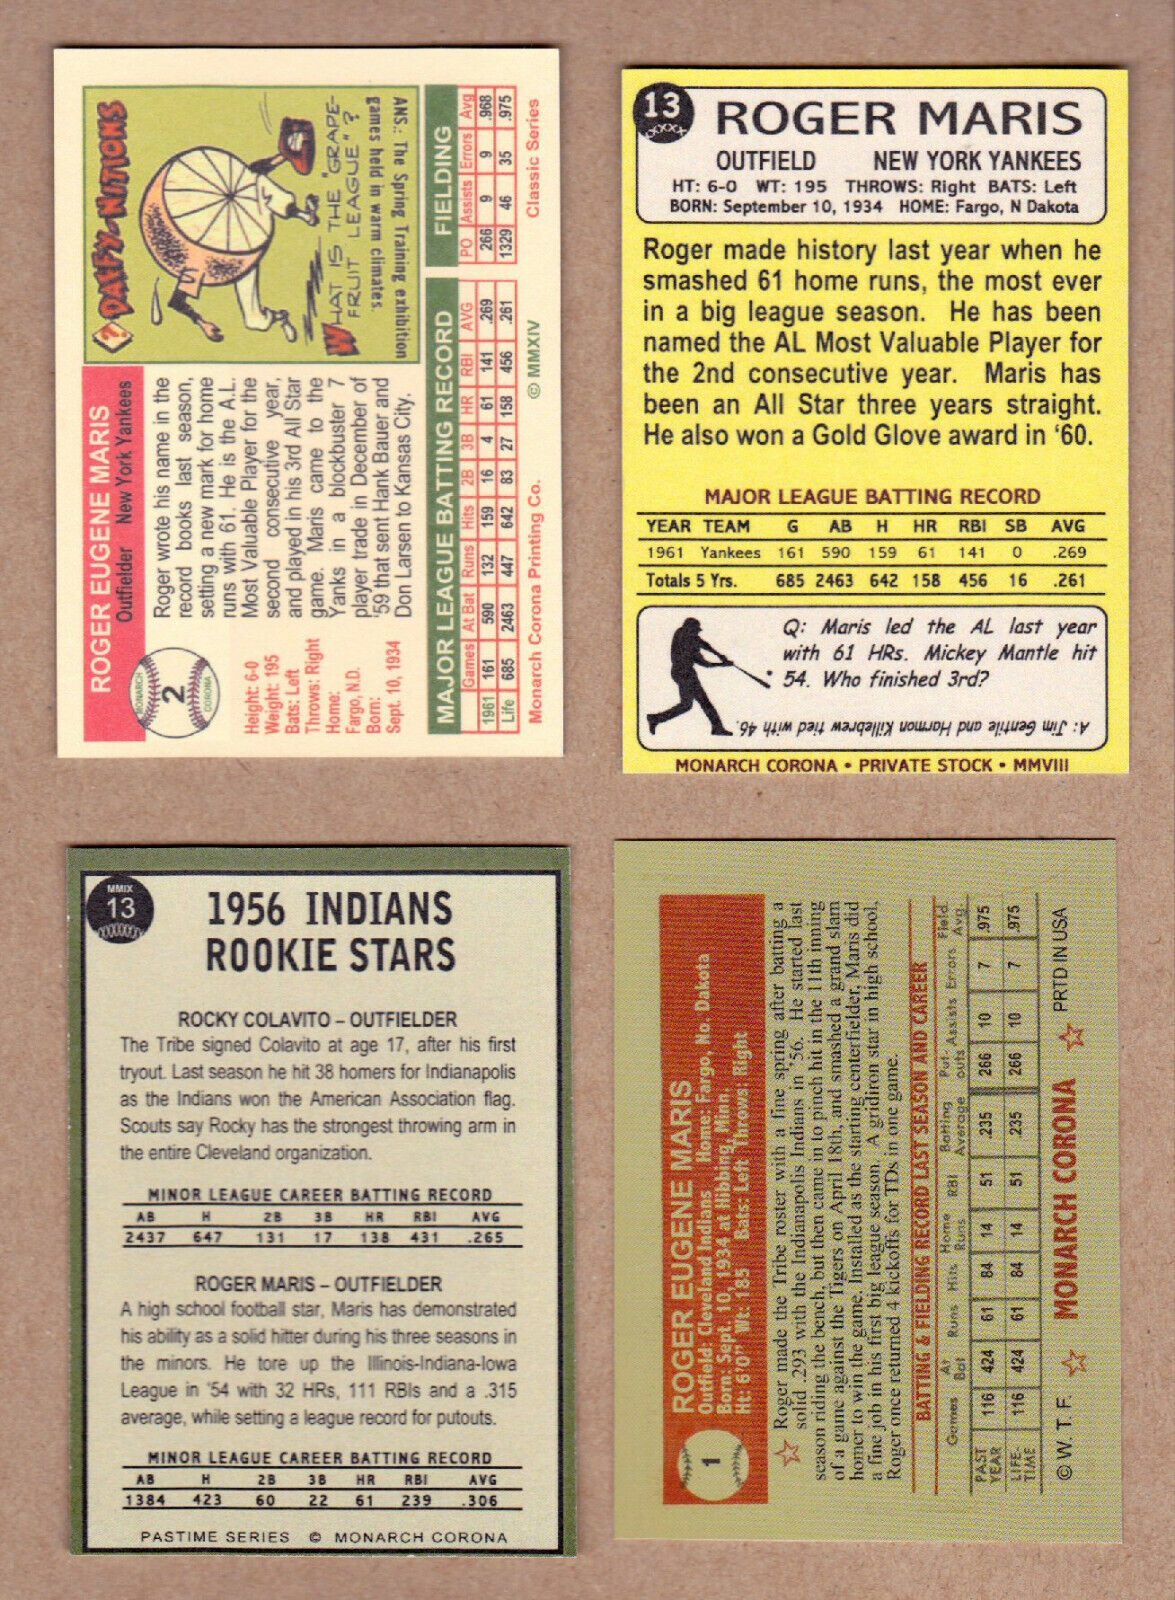 ROGER MARIS LOT OF 4: ROOKIE YEAR/61 HRS/WITH COLAVITO/CLEVELAND INDIANS Без бренда - фотография #2